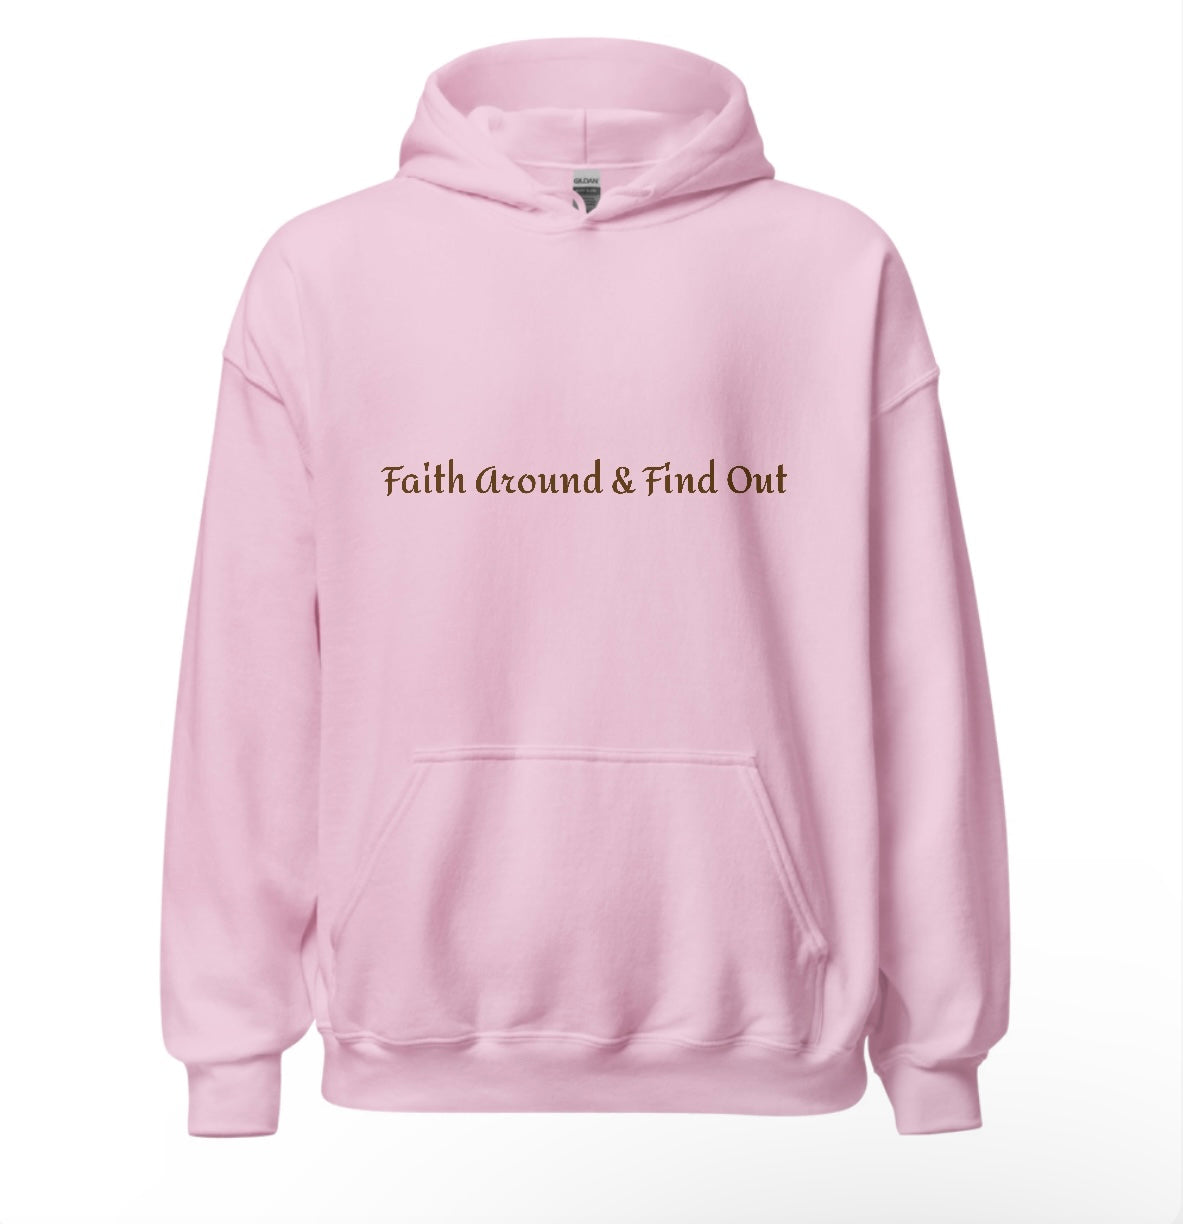 Faith Around & Find Out hoodie